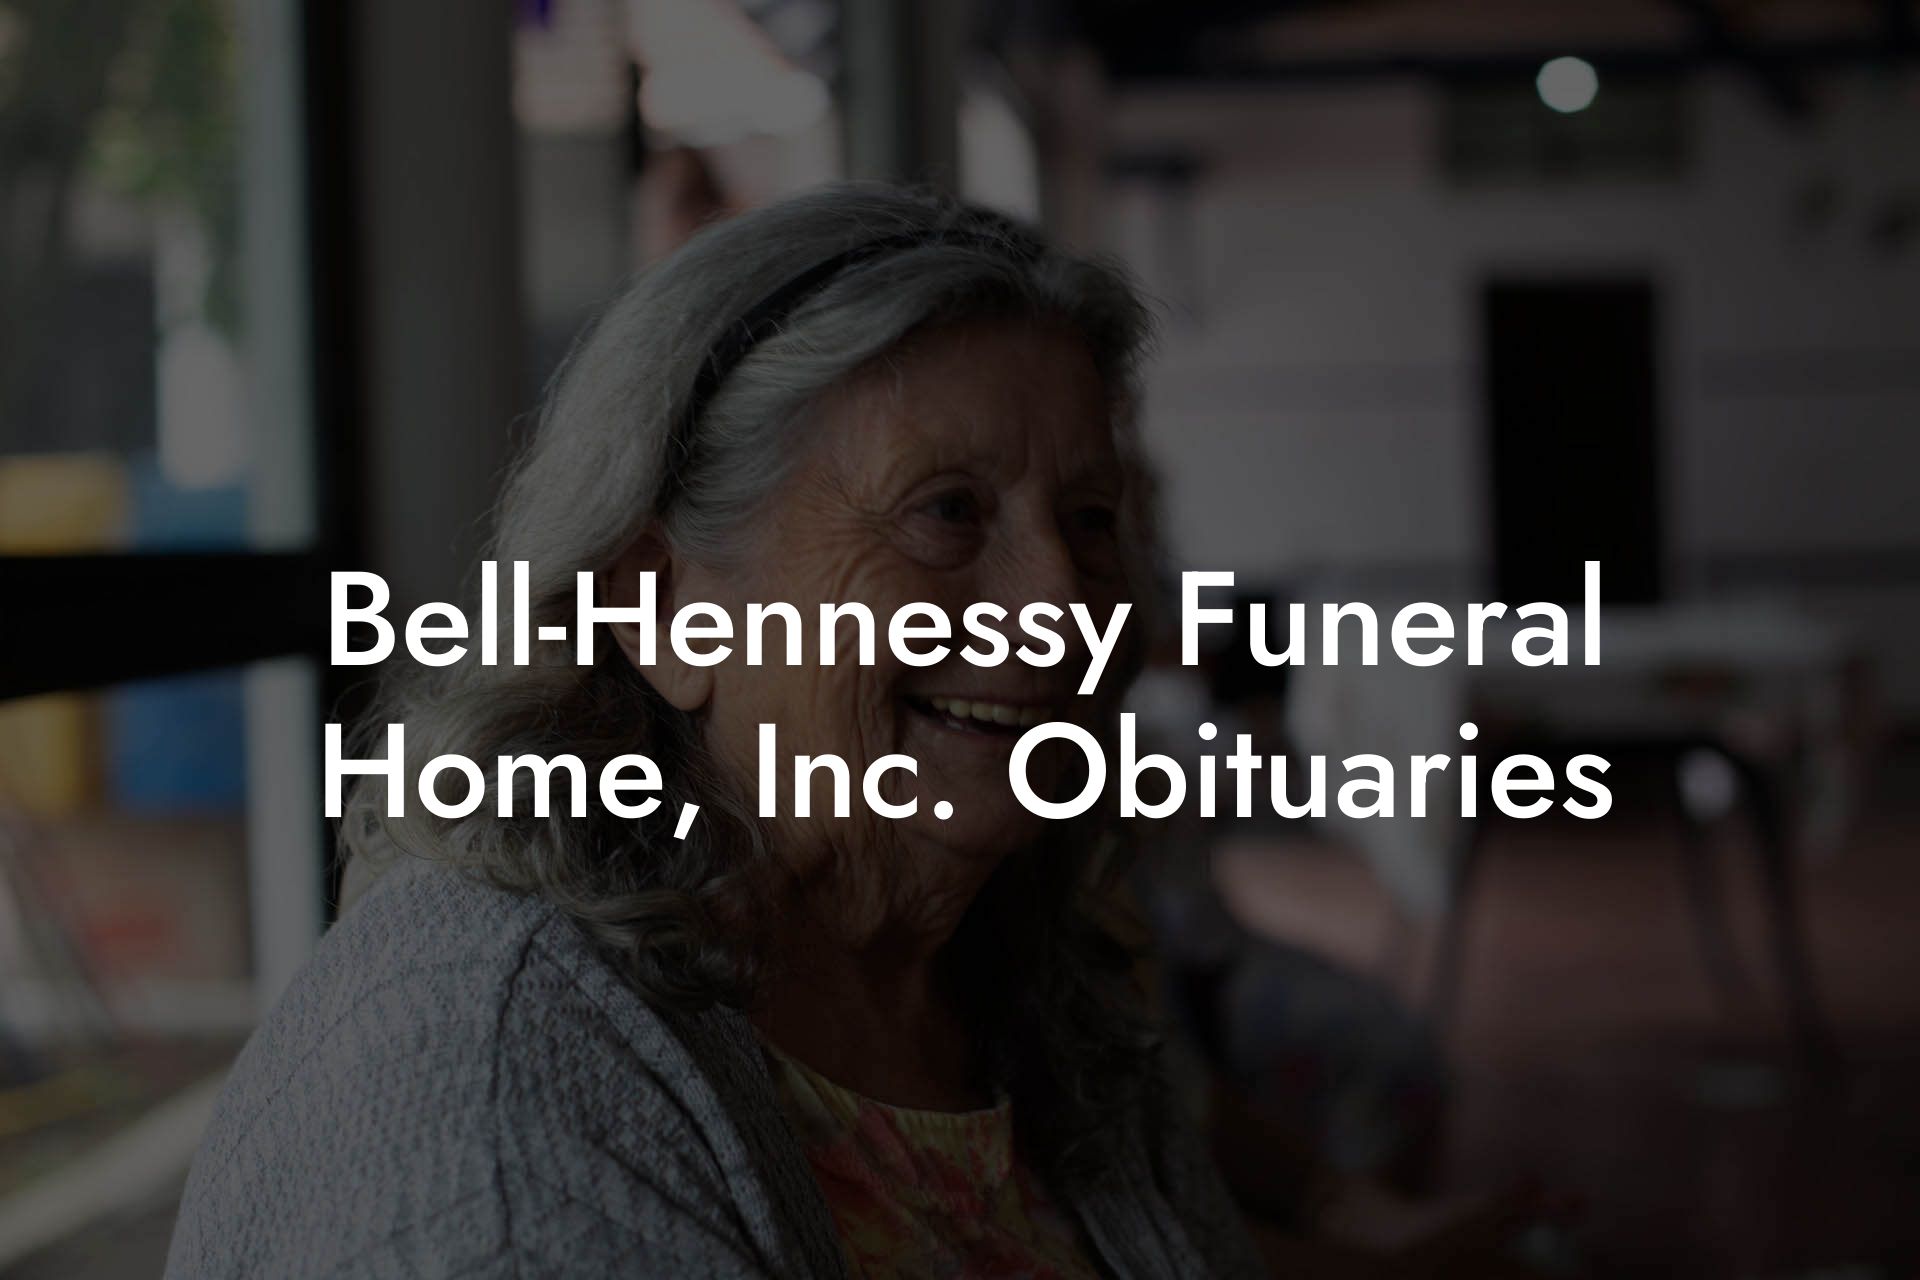 Bell-Hennessy Funeral Home, Inc. Obituaries